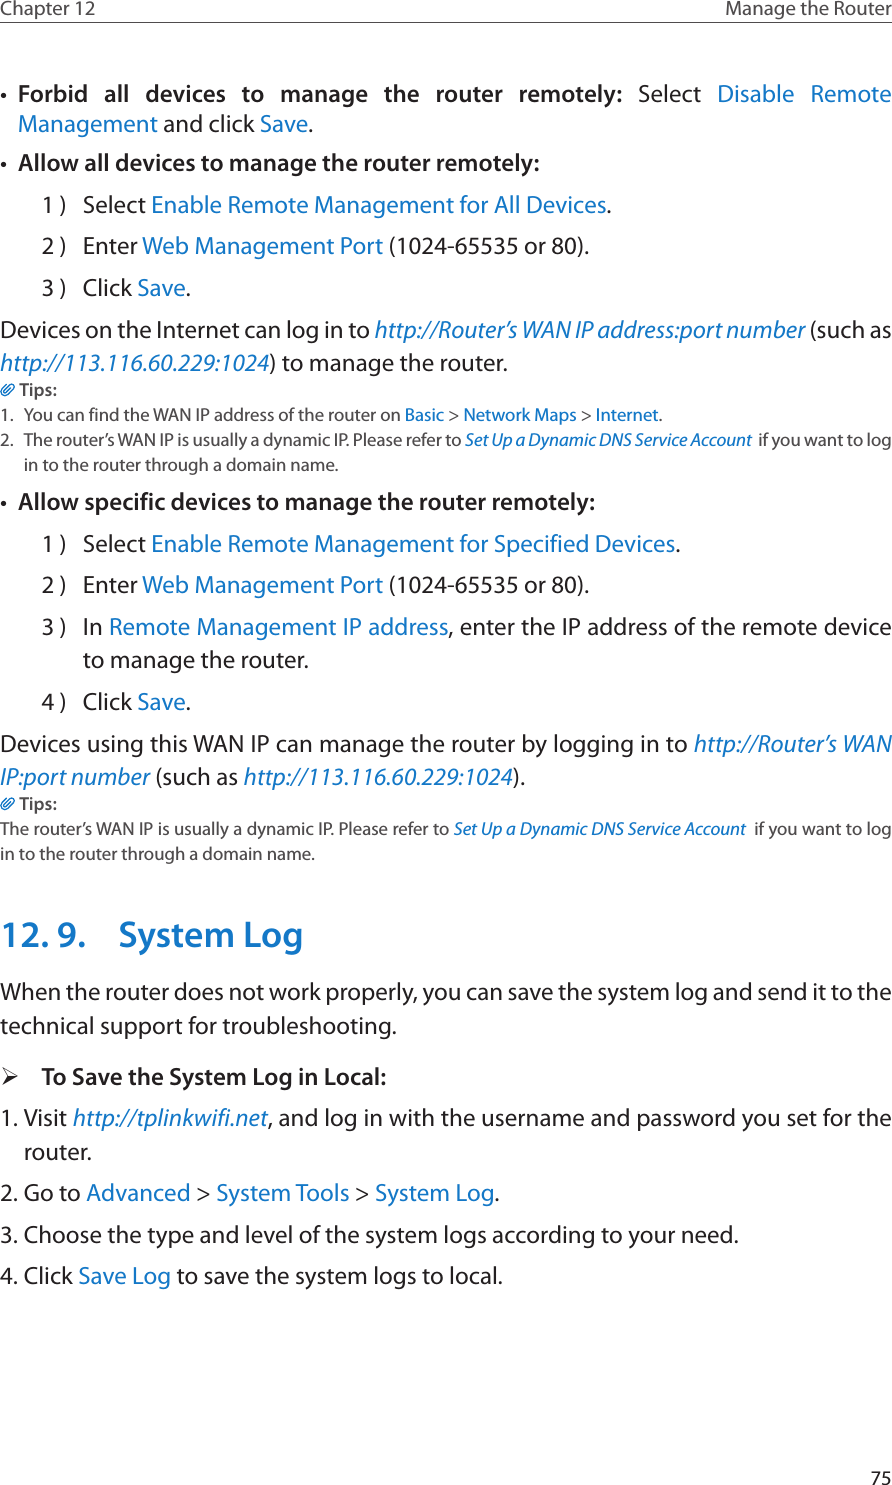 75Chapter 12 Manage the Router •  Forbid all devices to manage the router remotely:  Select  Disable Remote Management and click Save.•  Allow all devices to manage the router remotely:1 )  Select Enable Remote Management for All Devices.2 )  Enter Web Management Port (1024-65535 or 80).3 )  Click Save.Devices on the Internet can log in to http://Router’s WAN IP address:port number (such as http://113.116.60.229:1024) to manage the router.Tips:1.  You can find the WAN IP address of the router on Basic &gt; Network Maps &gt; Internet.2.  The router’s WAN IP is usually a dynamic IP. Please refer to Set Up a Dynamic DNS Service Account  if you want to log in to the router through a domain name.•  Allow specific devices to manage the router remotely:1 )  Select Enable Remote Management for Specified Devices.2 )  Enter Web Management Port (1024-65535 or 80).3 )  In Remote Management IP address, enter the IP address of the remote device to manage the router.4 )  Click Save.Devices using this WAN IP can manage the router by logging in to http://Router’s WAN IP:port number (such as http://113.116.60.229:1024).Tips: The router’s WAN IP is usually a dynamic IP. Please refer to Set Up a Dynamic DNS Service Account  if you want to log in to the router through a domain name.12. 9.  System LogWhen the router does not work properly, you can save the system log and send it to the technical support for troubleshooting. ¾To Save the System Log in Local:1. Visit http://tplinkwifi.net, and log in with the username and password you set for the router.2. Go to Advanced &gt; System Tools &gt; System Log.3. Choose the type and level of the system logs according to your need.4. Click Save Log to save the system logs to local.